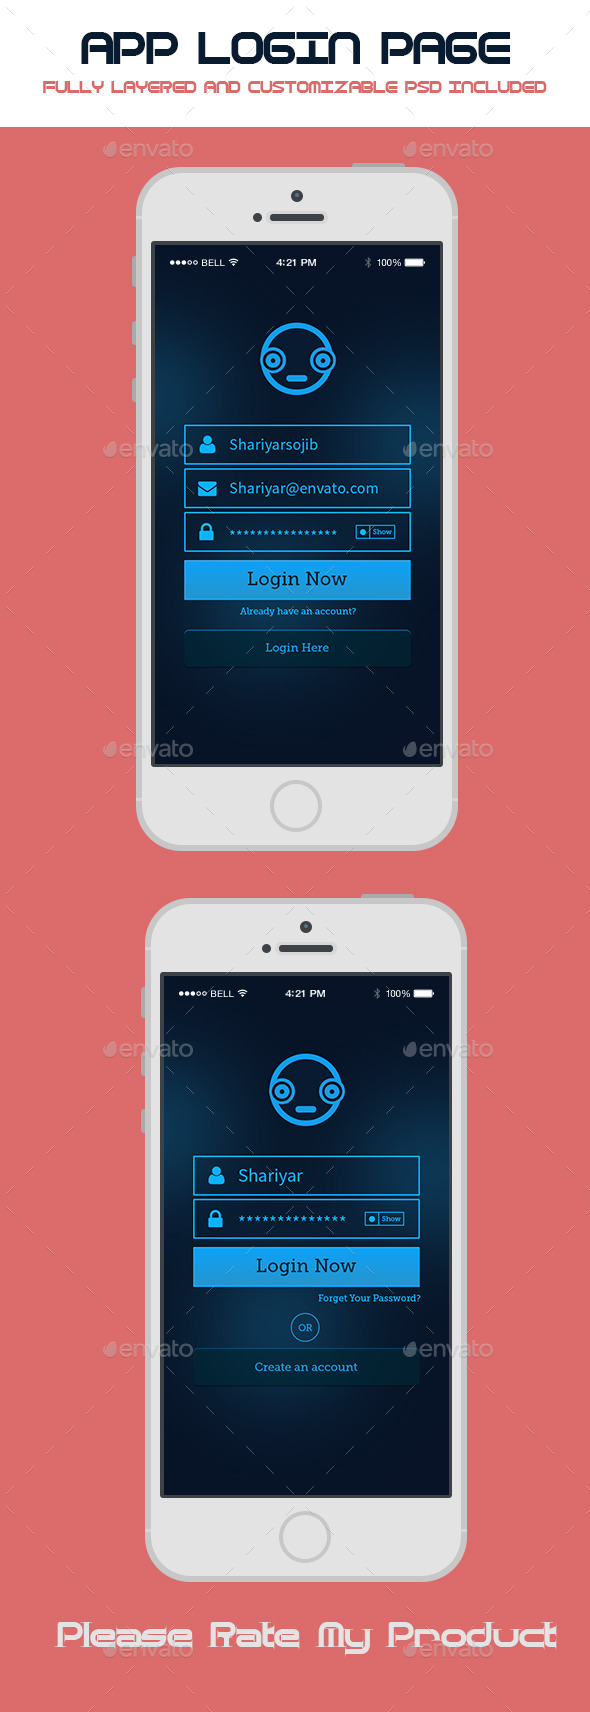 App Login Page (User Interfaces)